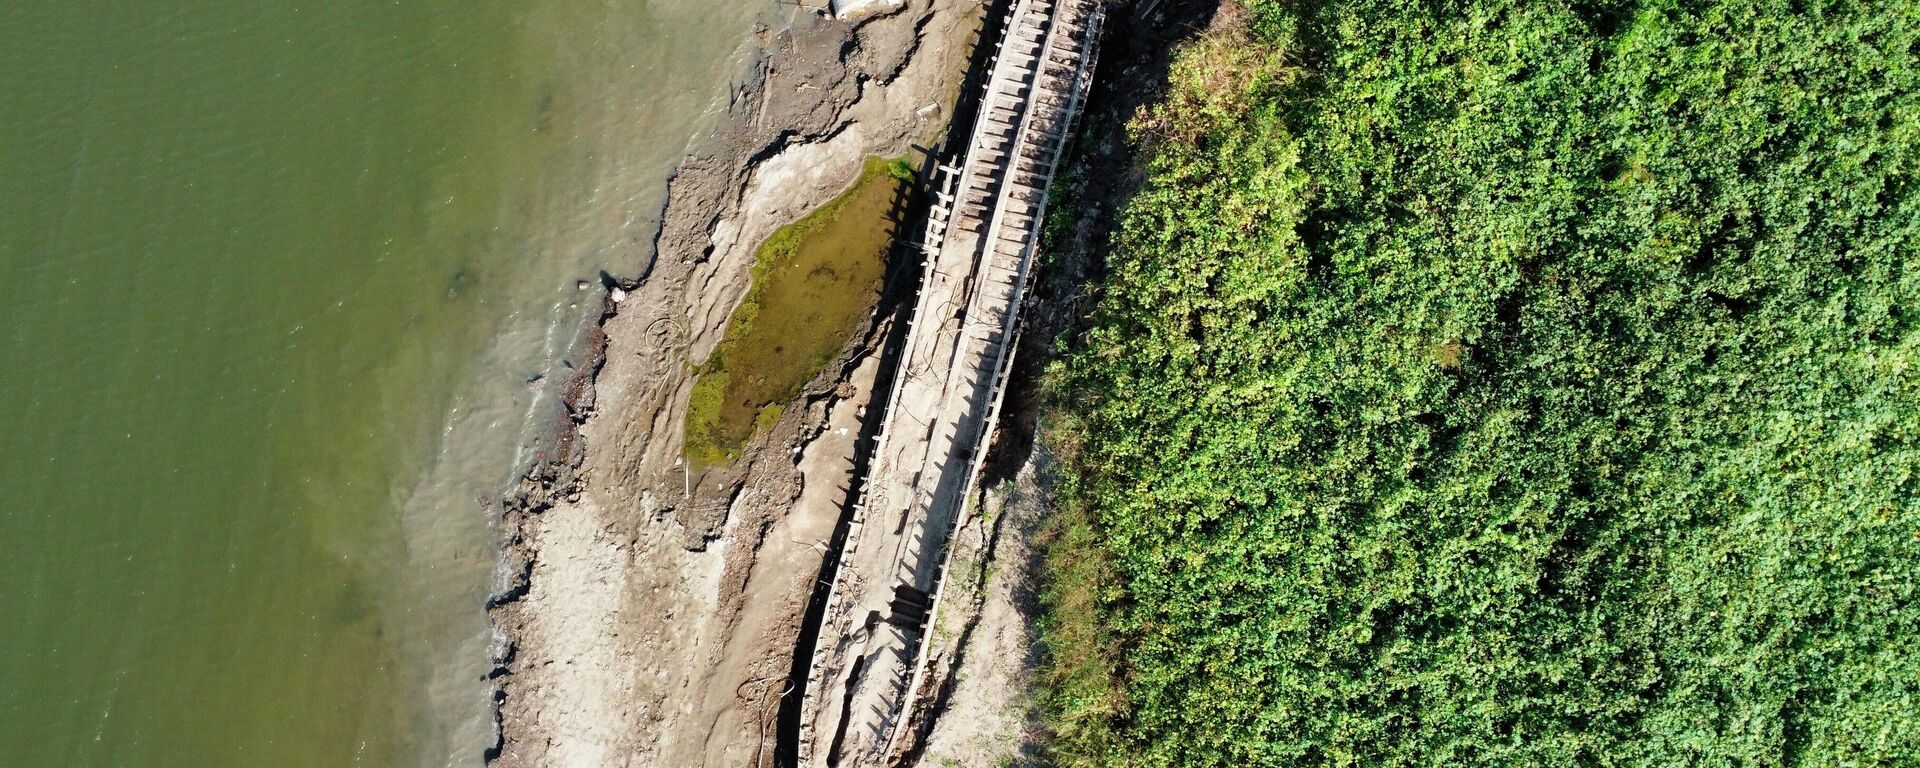 A shipwreck is exposed along the banks of the Mississippi River in Baton Rouge, due to low water levels, on Tuesday, Oct. 18, 2022, in Baton Rouge, La. Archaeologists believe the ship is a ferry that was built in the late 1800s or early 1900s and sunk in 1915. - Sputnik International, 1920, 19.10.2022